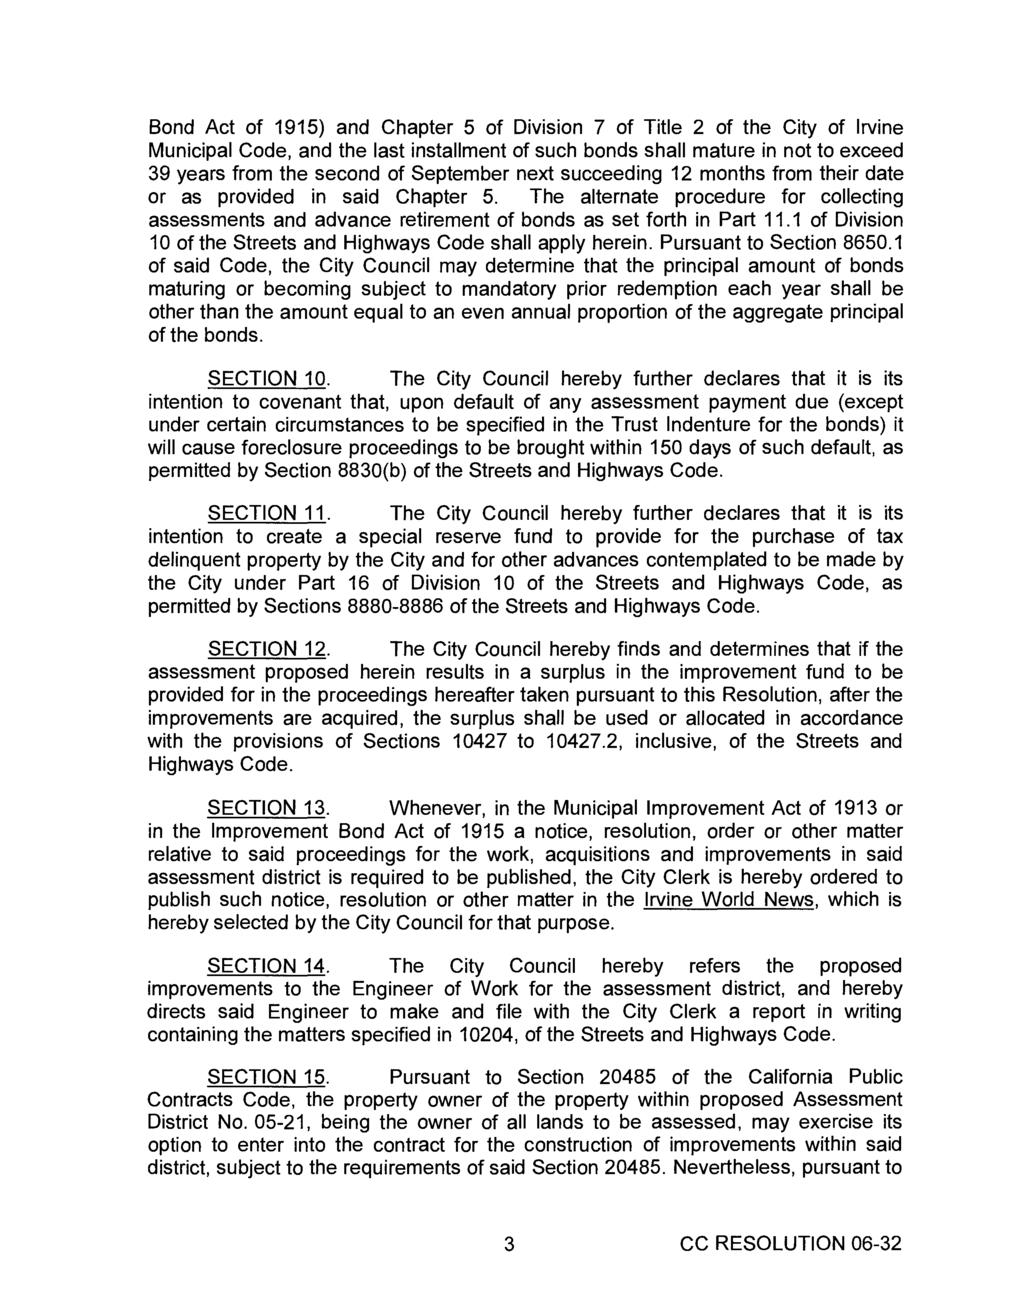 Bond Act of 1915) and Chapter 5 of Division 7 of Title 2 of the City of Irvine Municipal Code, and the last installment of such bonds shall mature in not to exceed 39 years from the second of